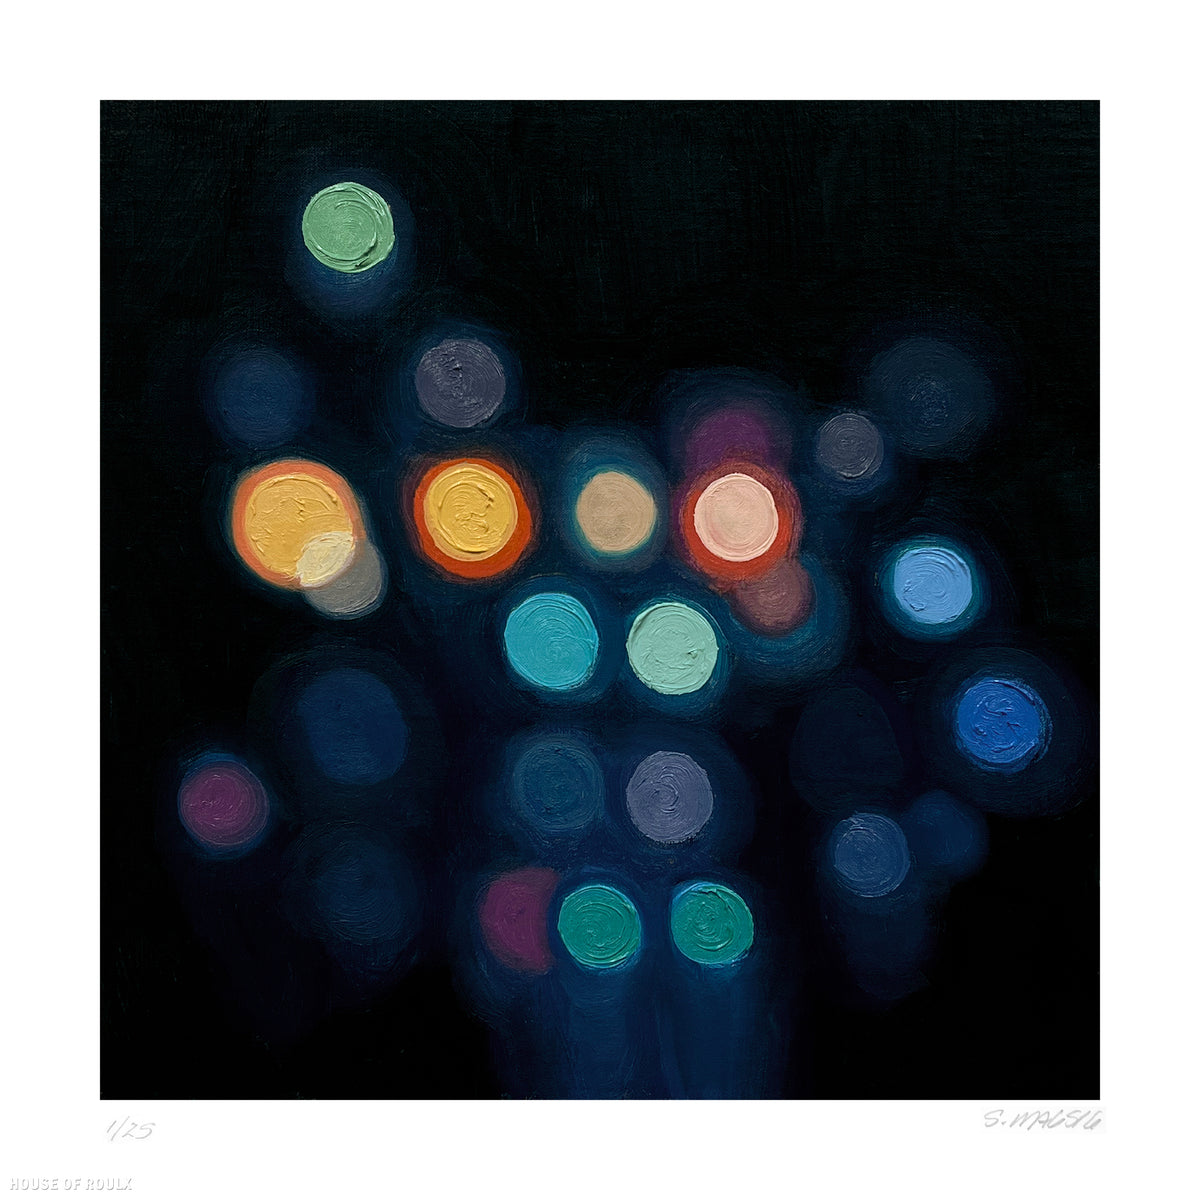 Stephen Magsig &quot;Citylights 566&quot; - Archival Print, Limited Edition of 25 - 12 x 12&quot;